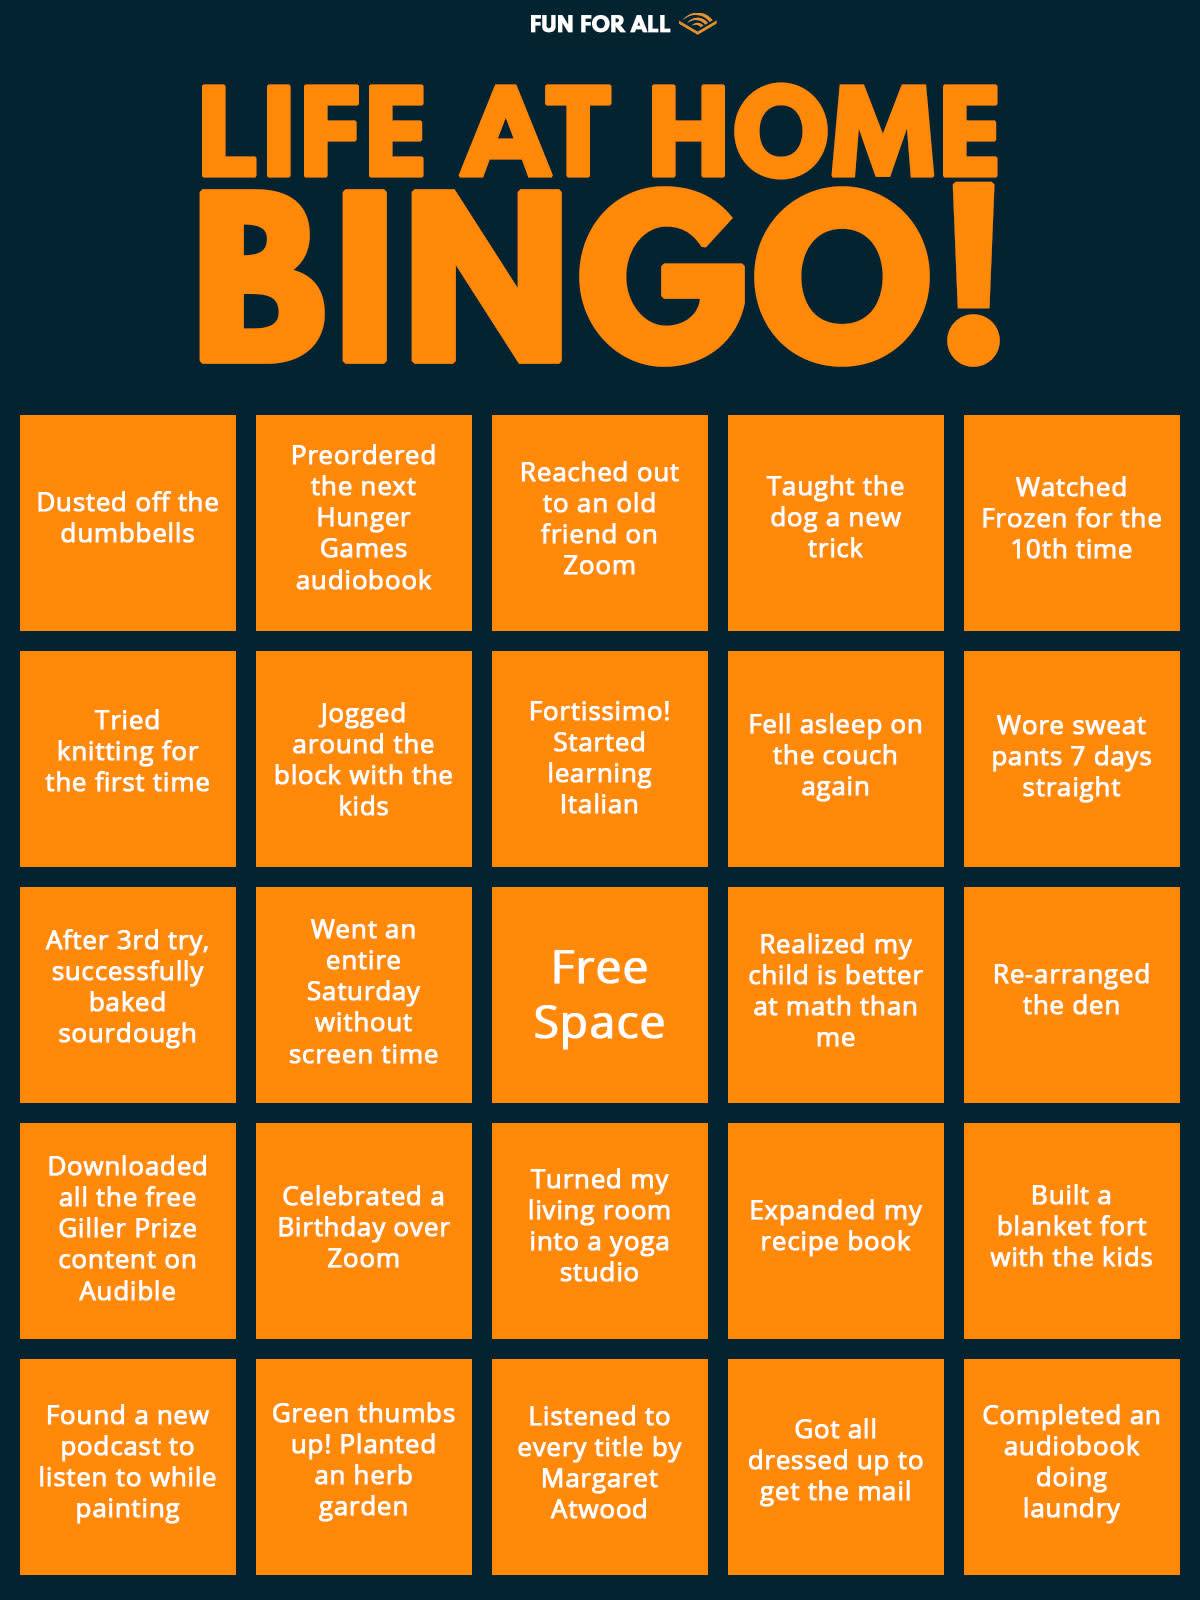 A digital recreation of a bingo card filled with common living-at-home activities such as “re-arranging the den”